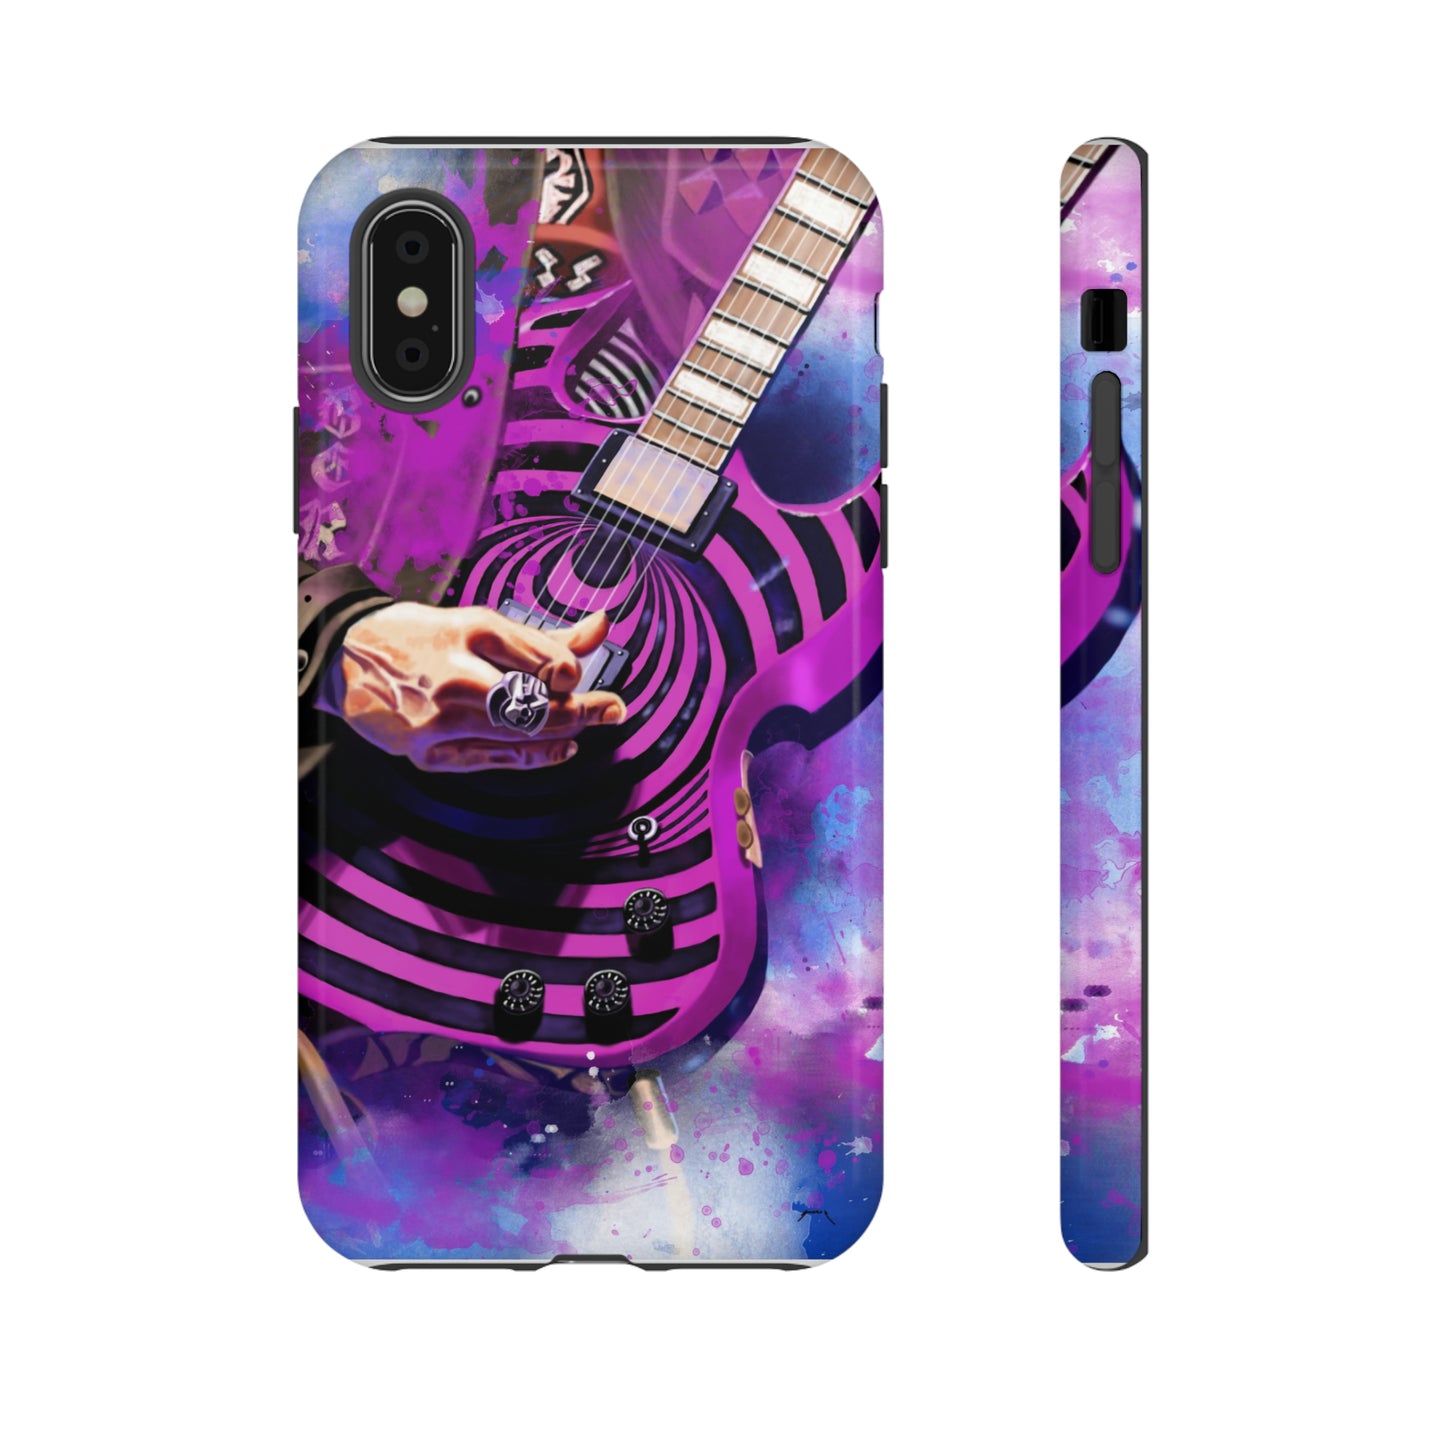 digital painting of a purple-black electric guitar with hand printed on iphone phone case